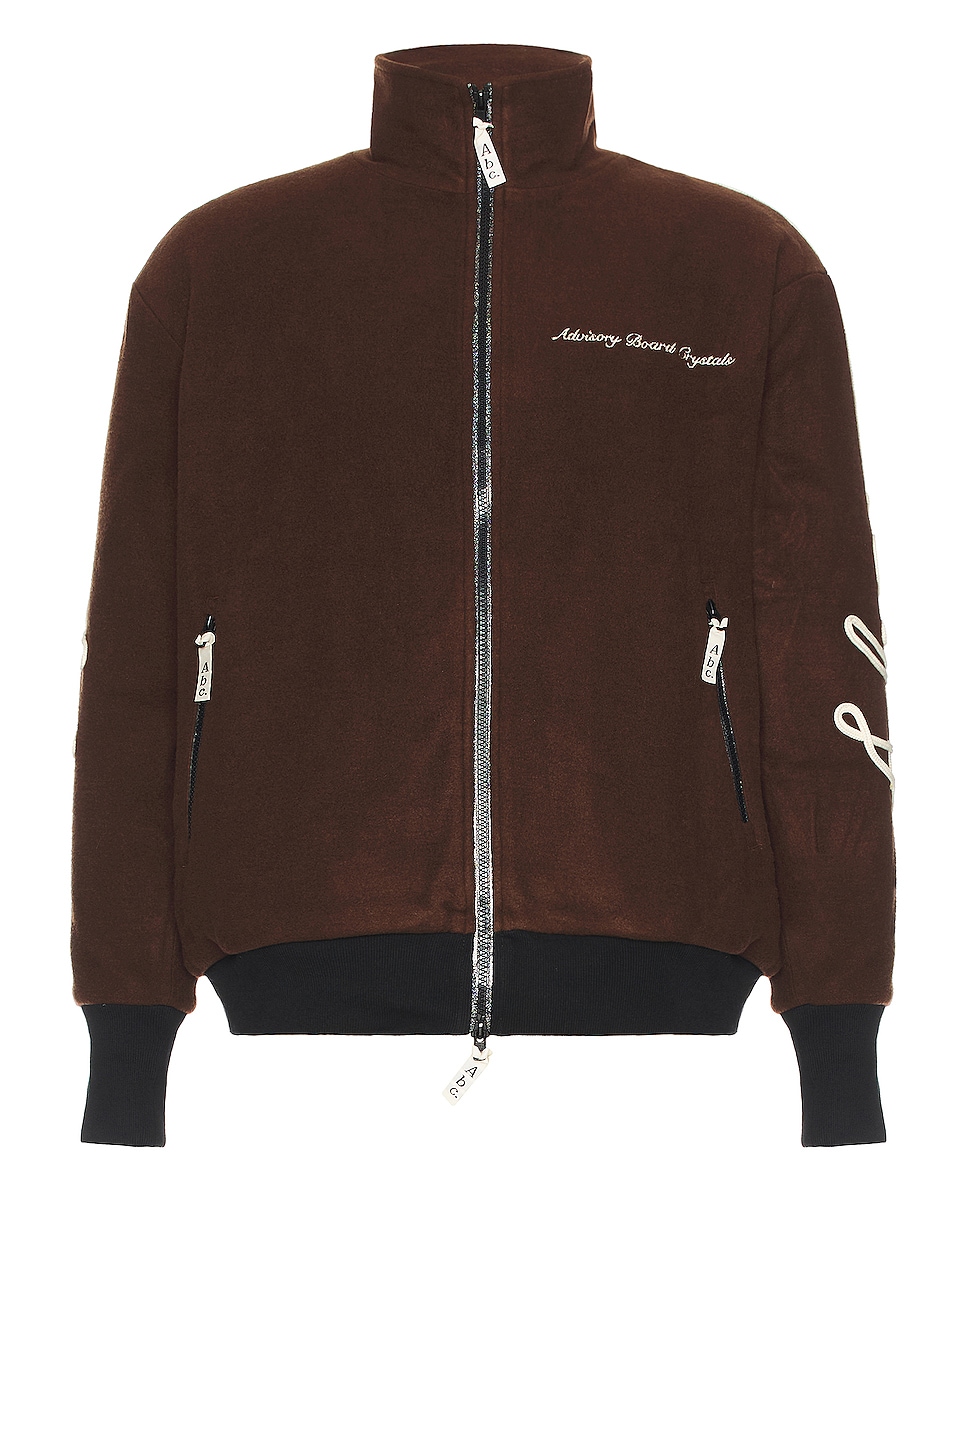 Image 1 of Advisory Board Crystals Wool Track Jacket in Wool Traok